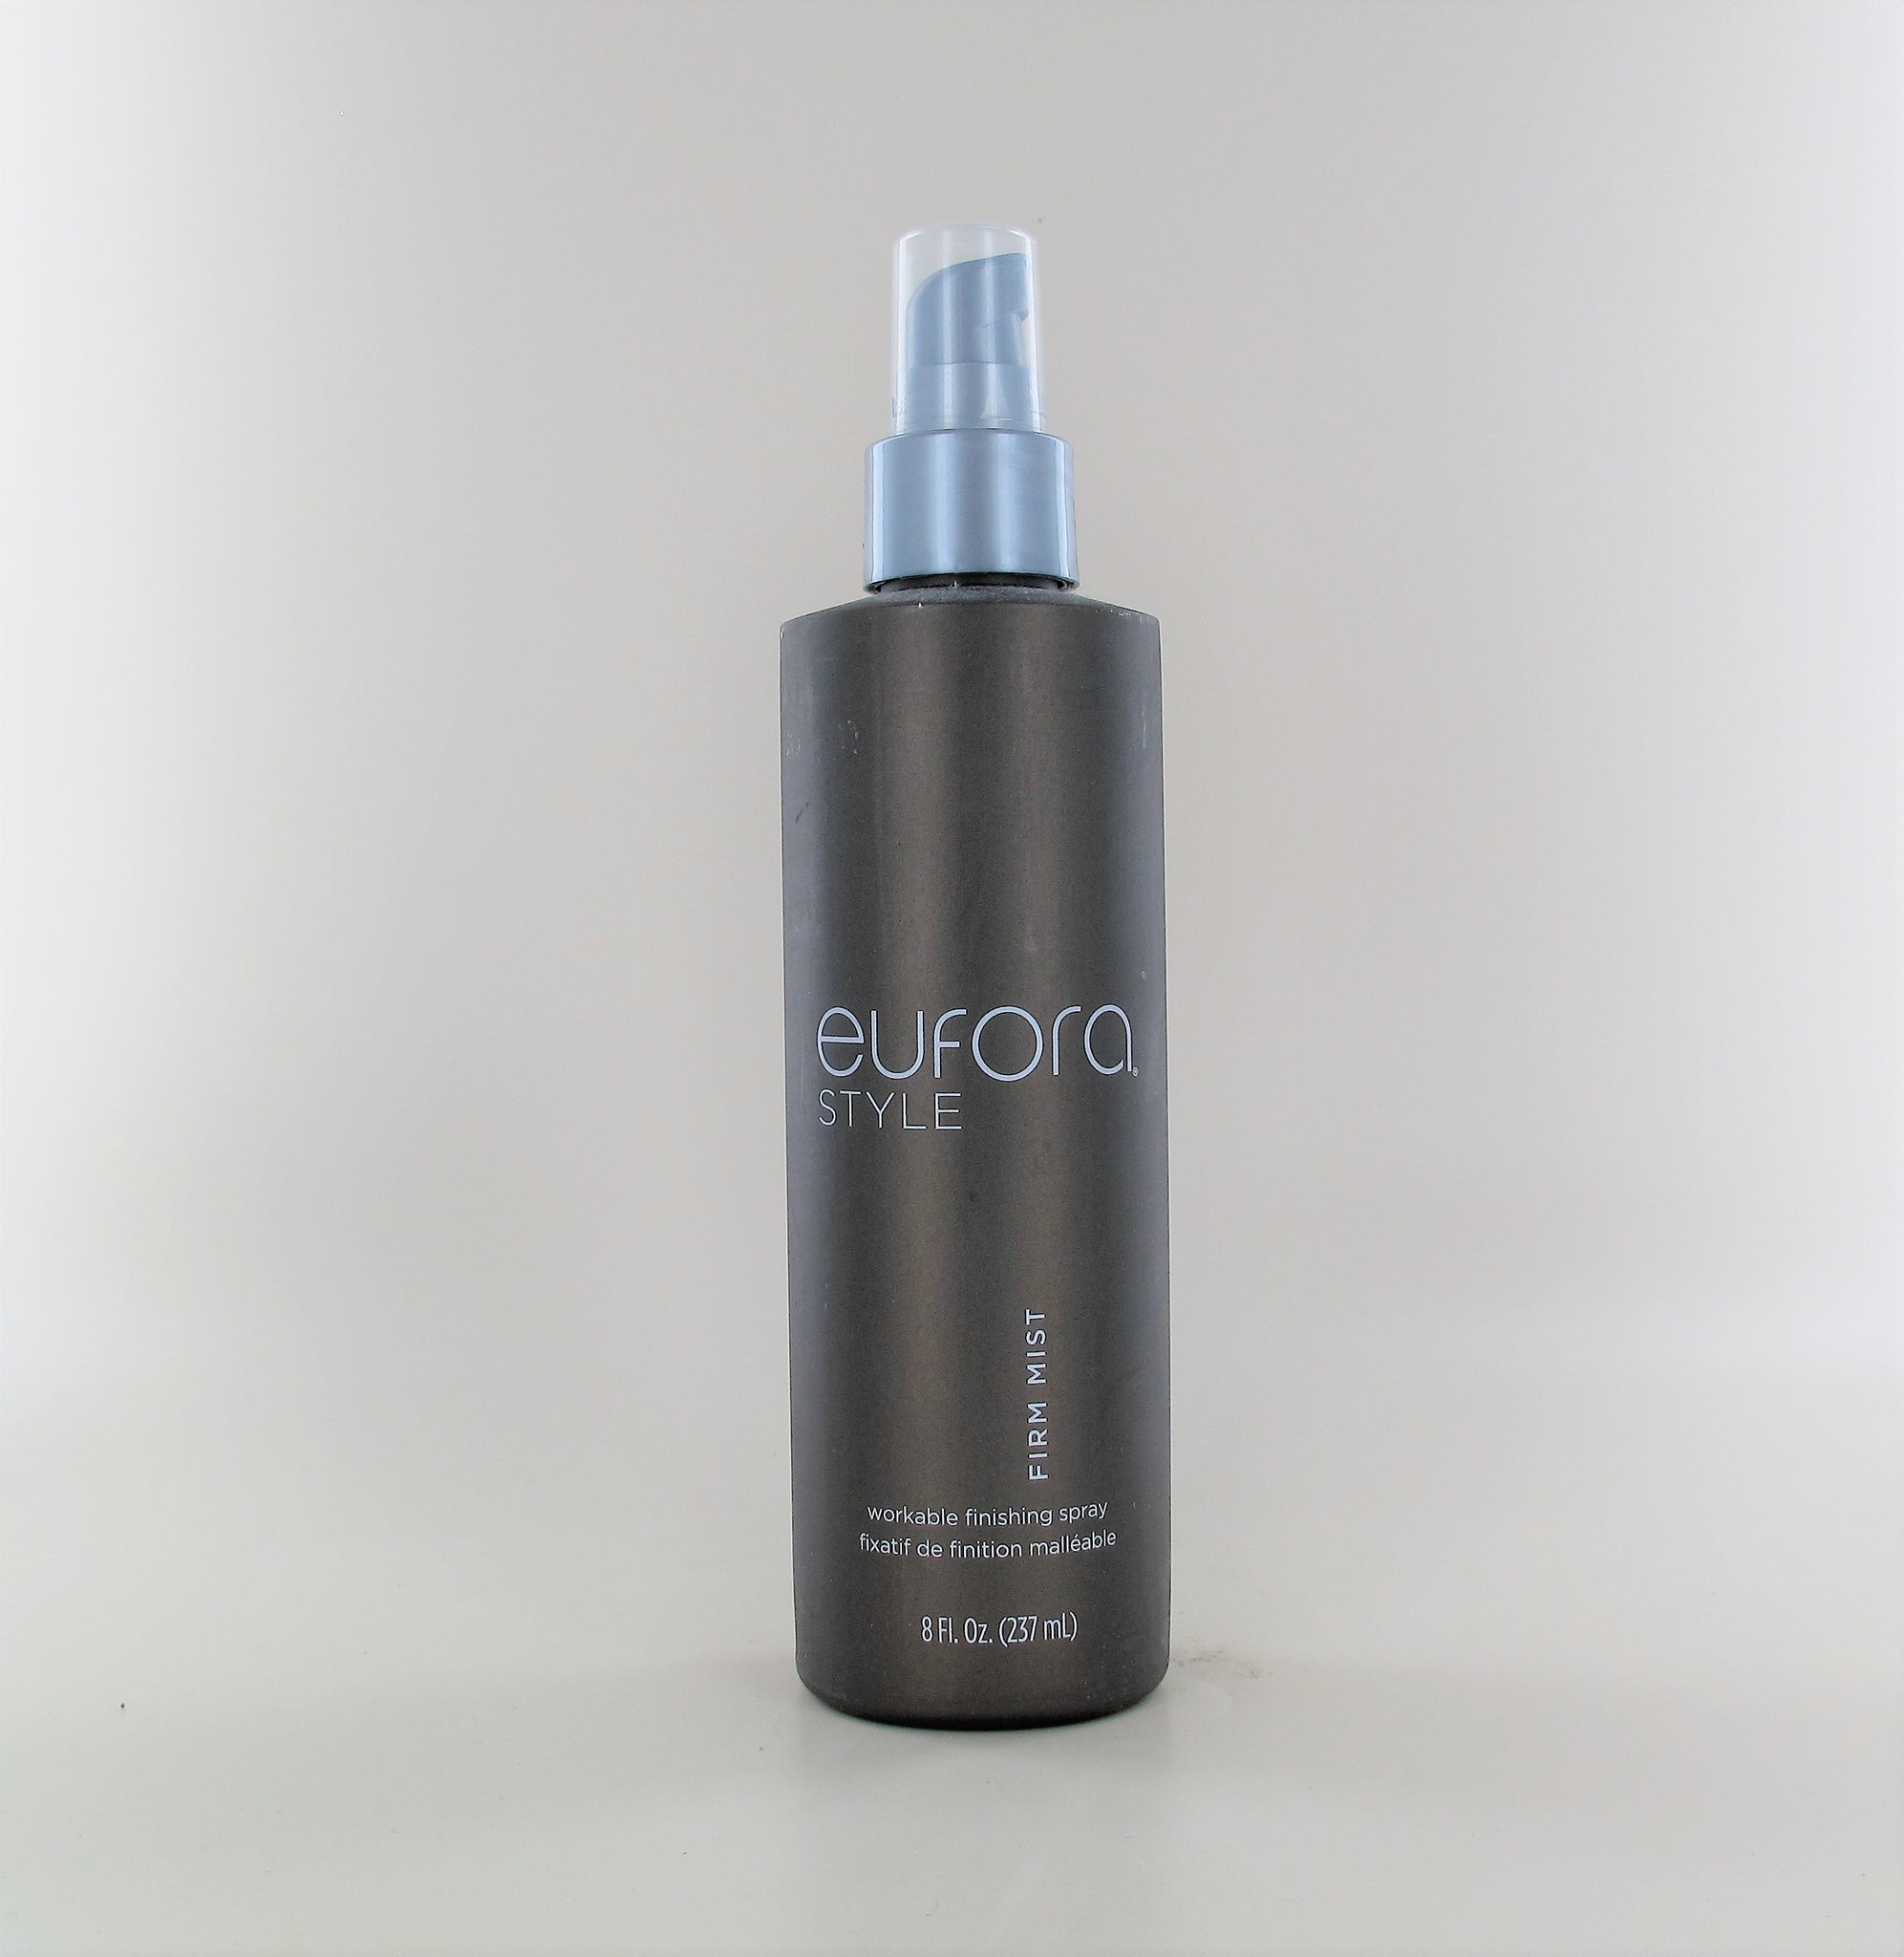 EUFORA Style Firm Mist Workable Finishing Spray 8 oz